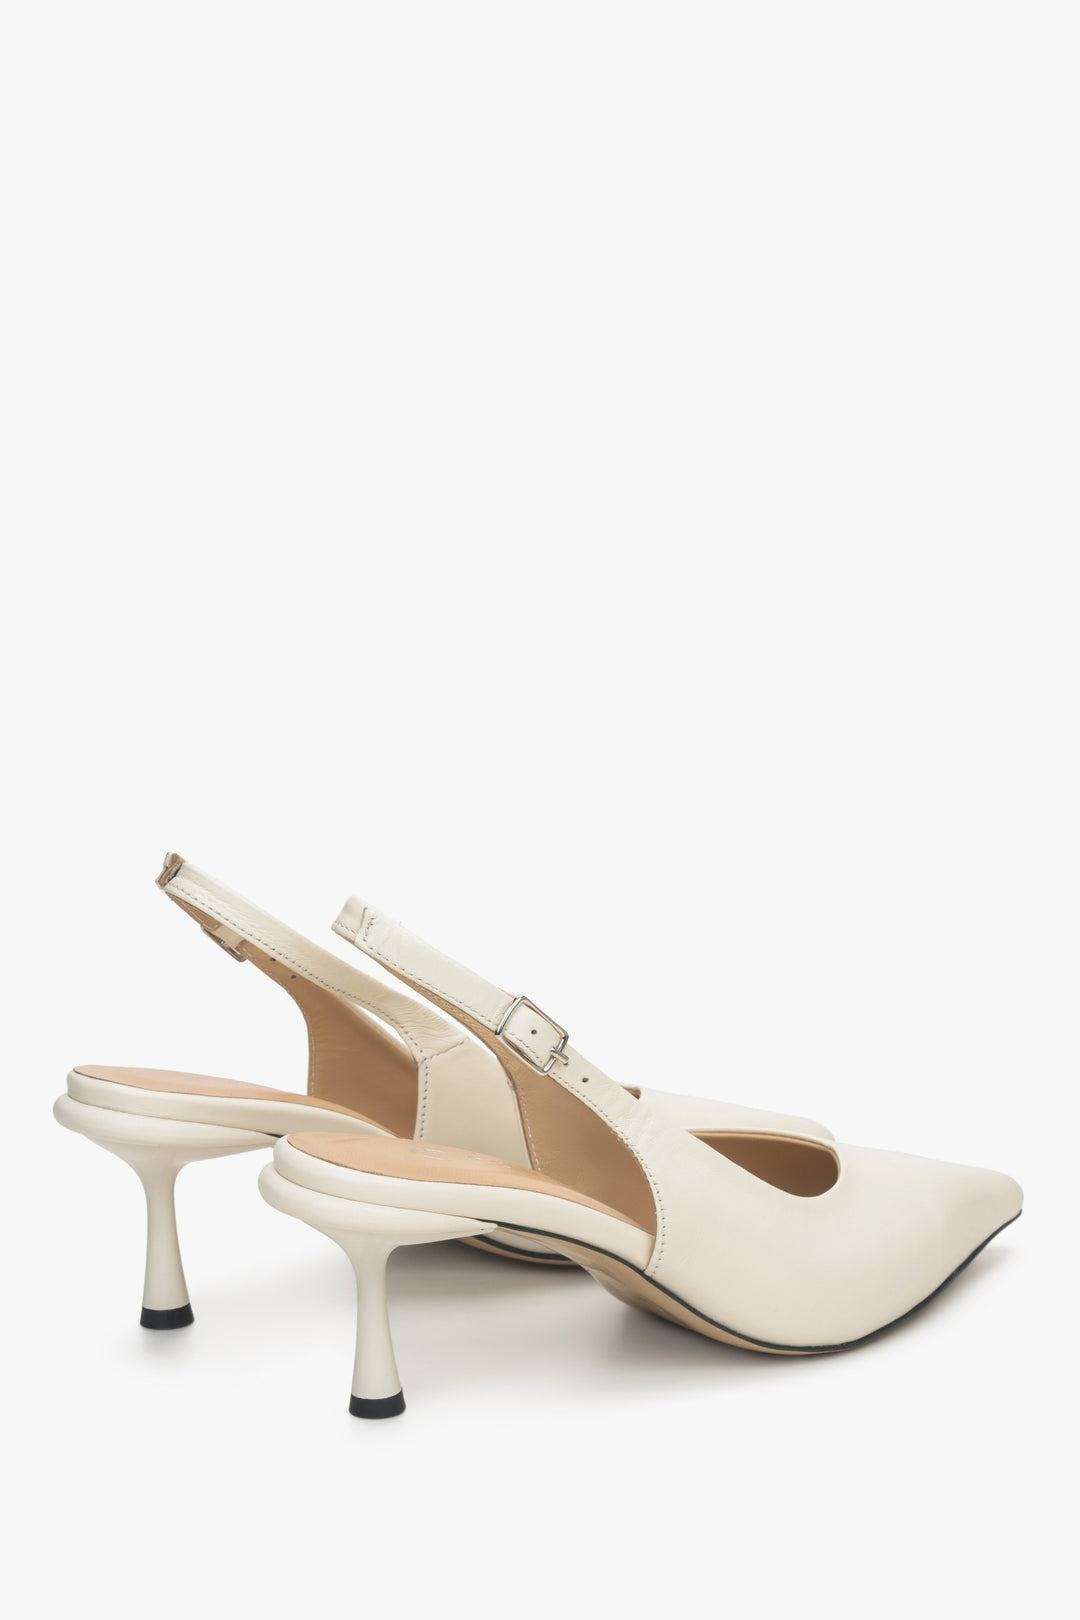 Women's white slingbacks by Estro made of genuine leather.